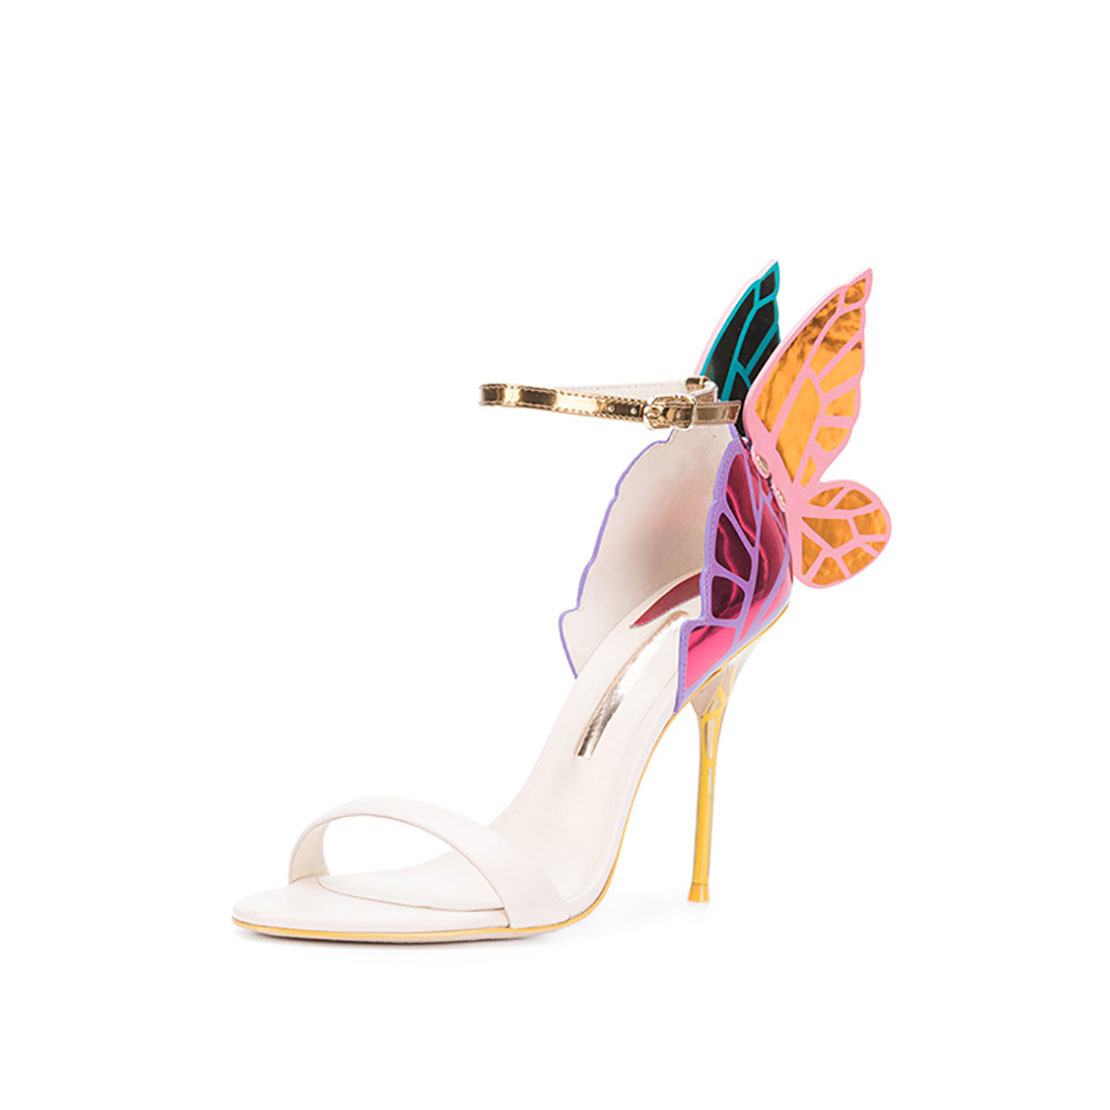 Patent leather colorful heel fashion party butterfly women sandals shoes  YB1012